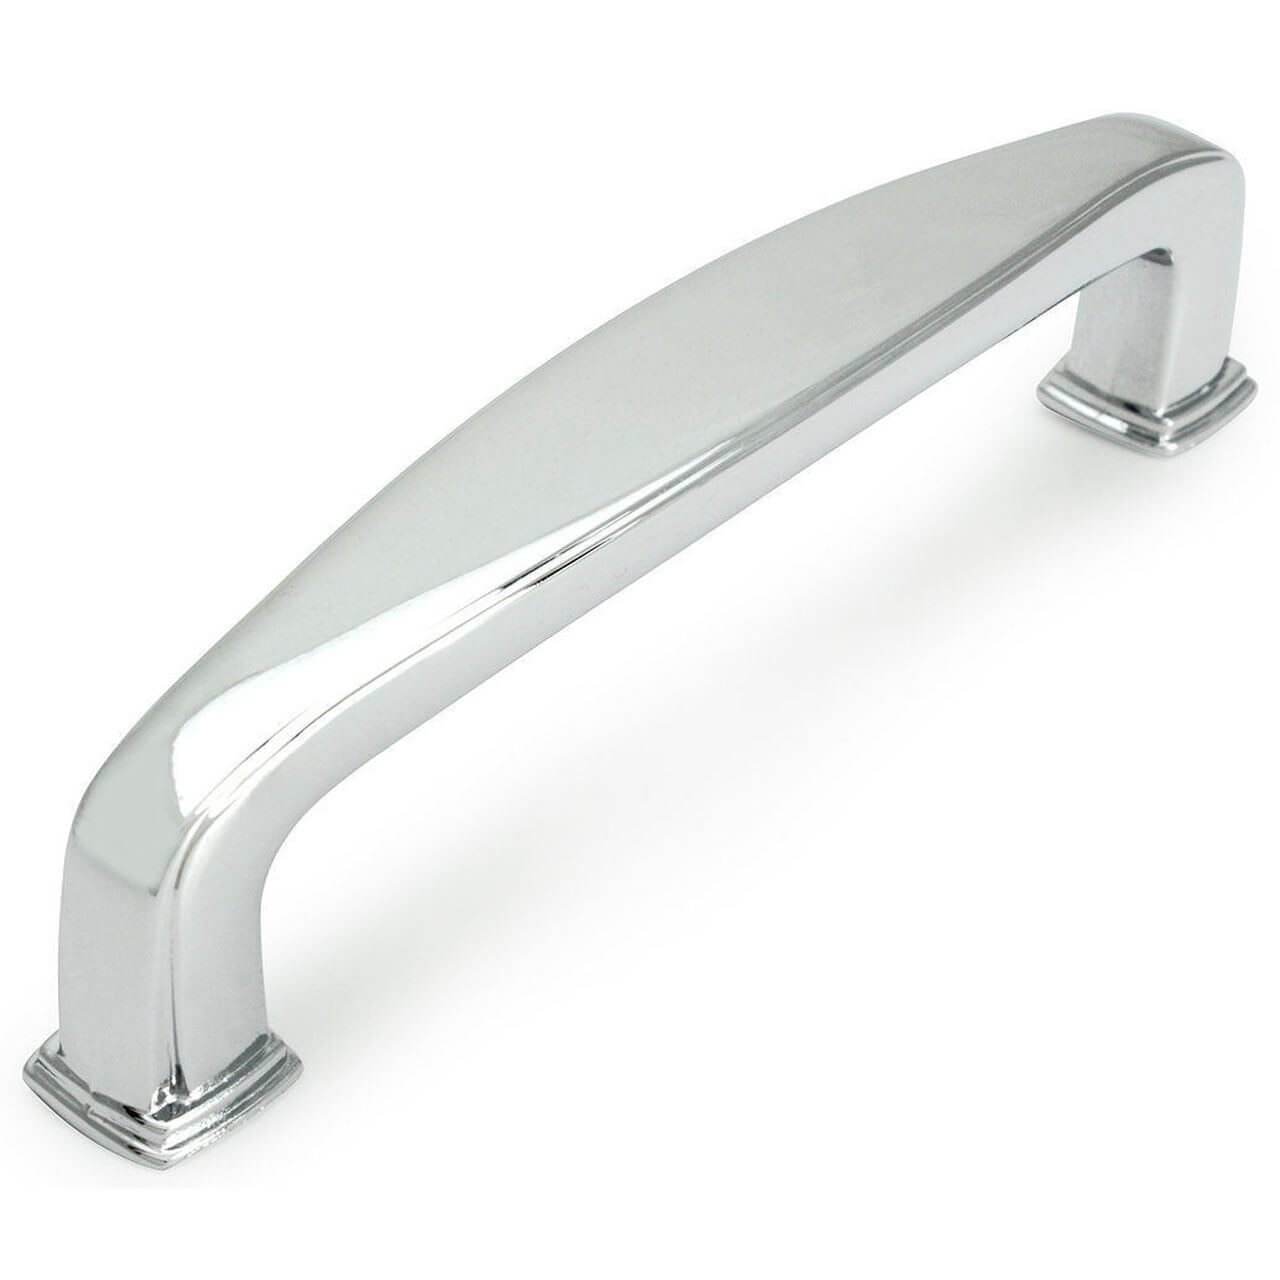 Polished chrome drawer handle with three inch hole spacing